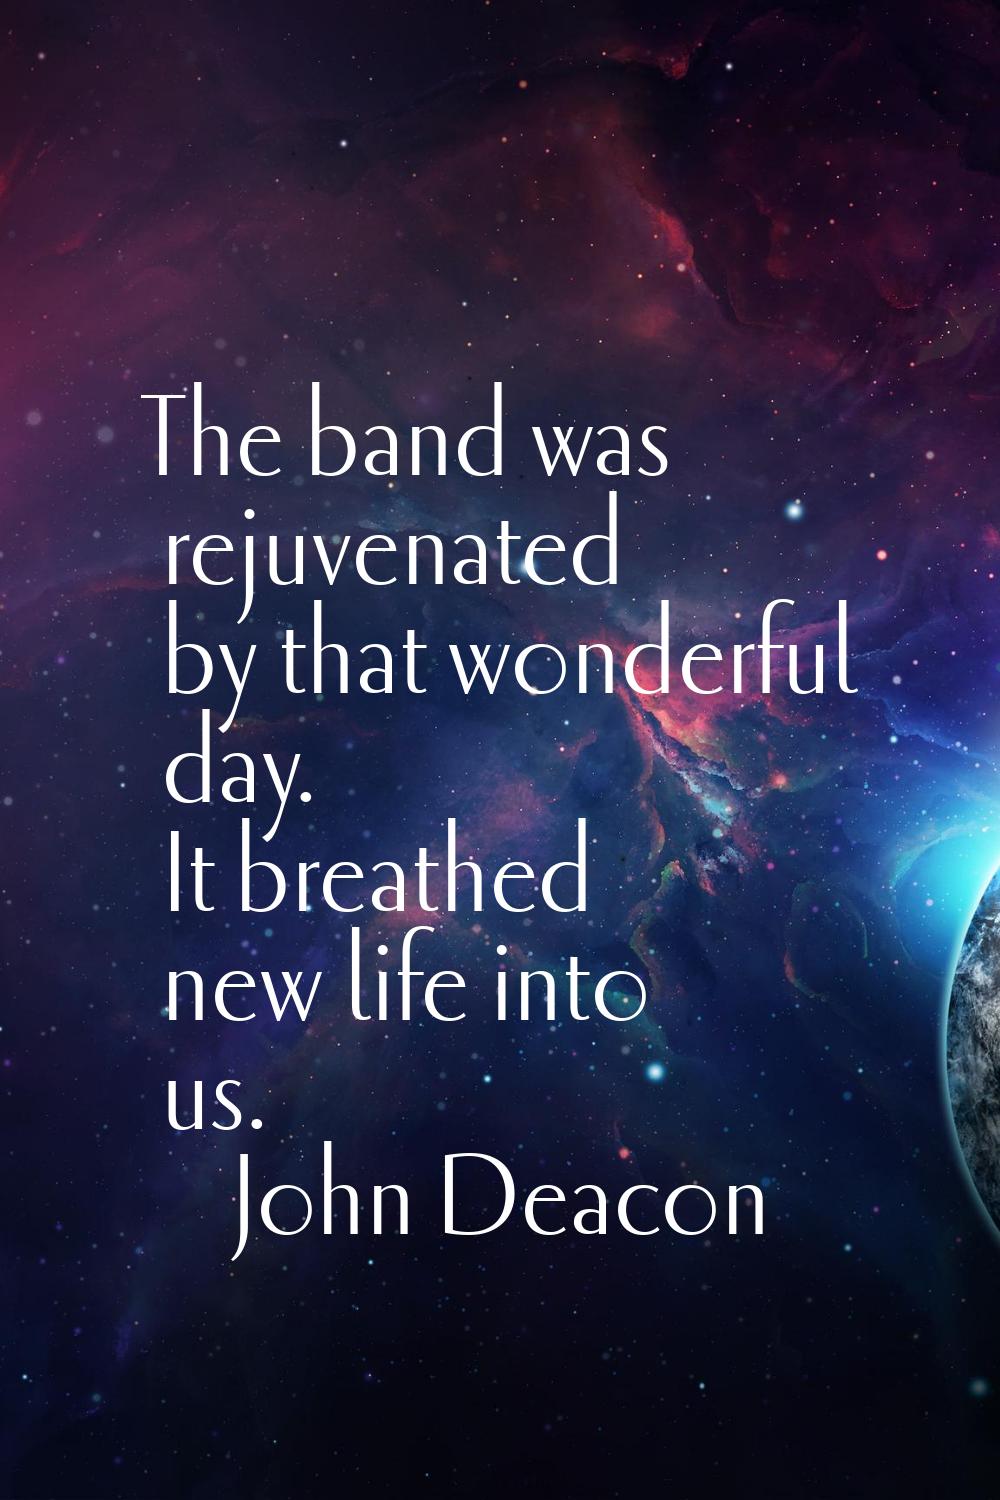 The band was rejuvenated by that wonderful day. It breathed new life into us.